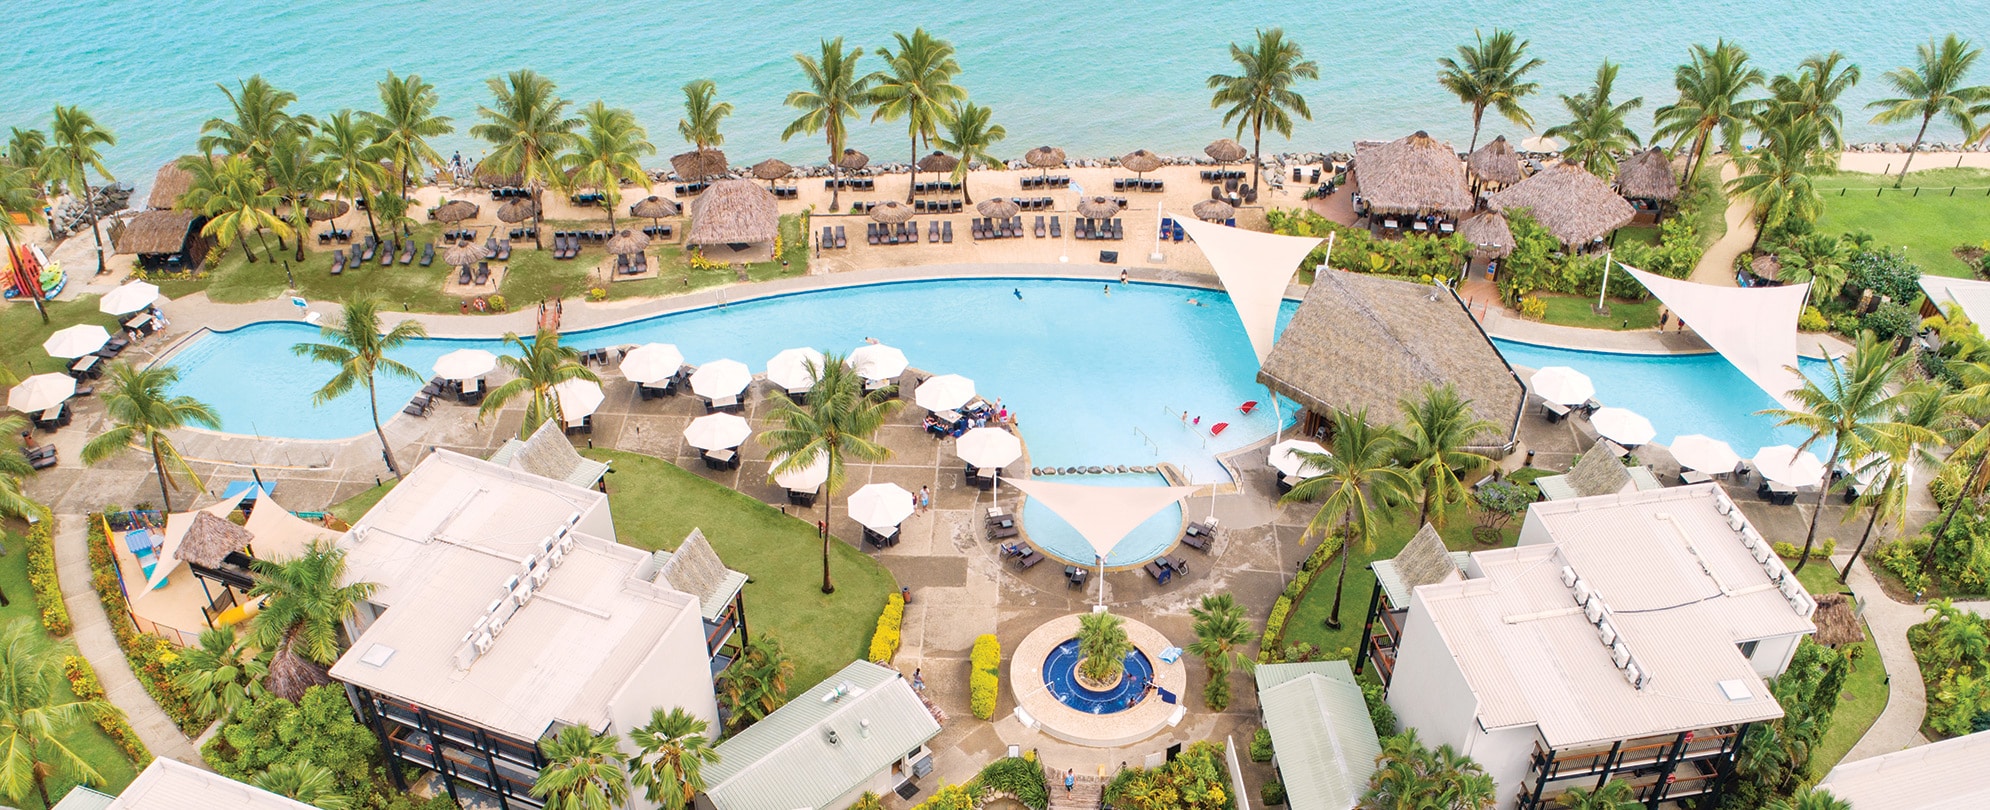 An aerial view of the pool with palm trees and pool umbrellas overlooking the ocean at Club Wyndham Denarau Island.